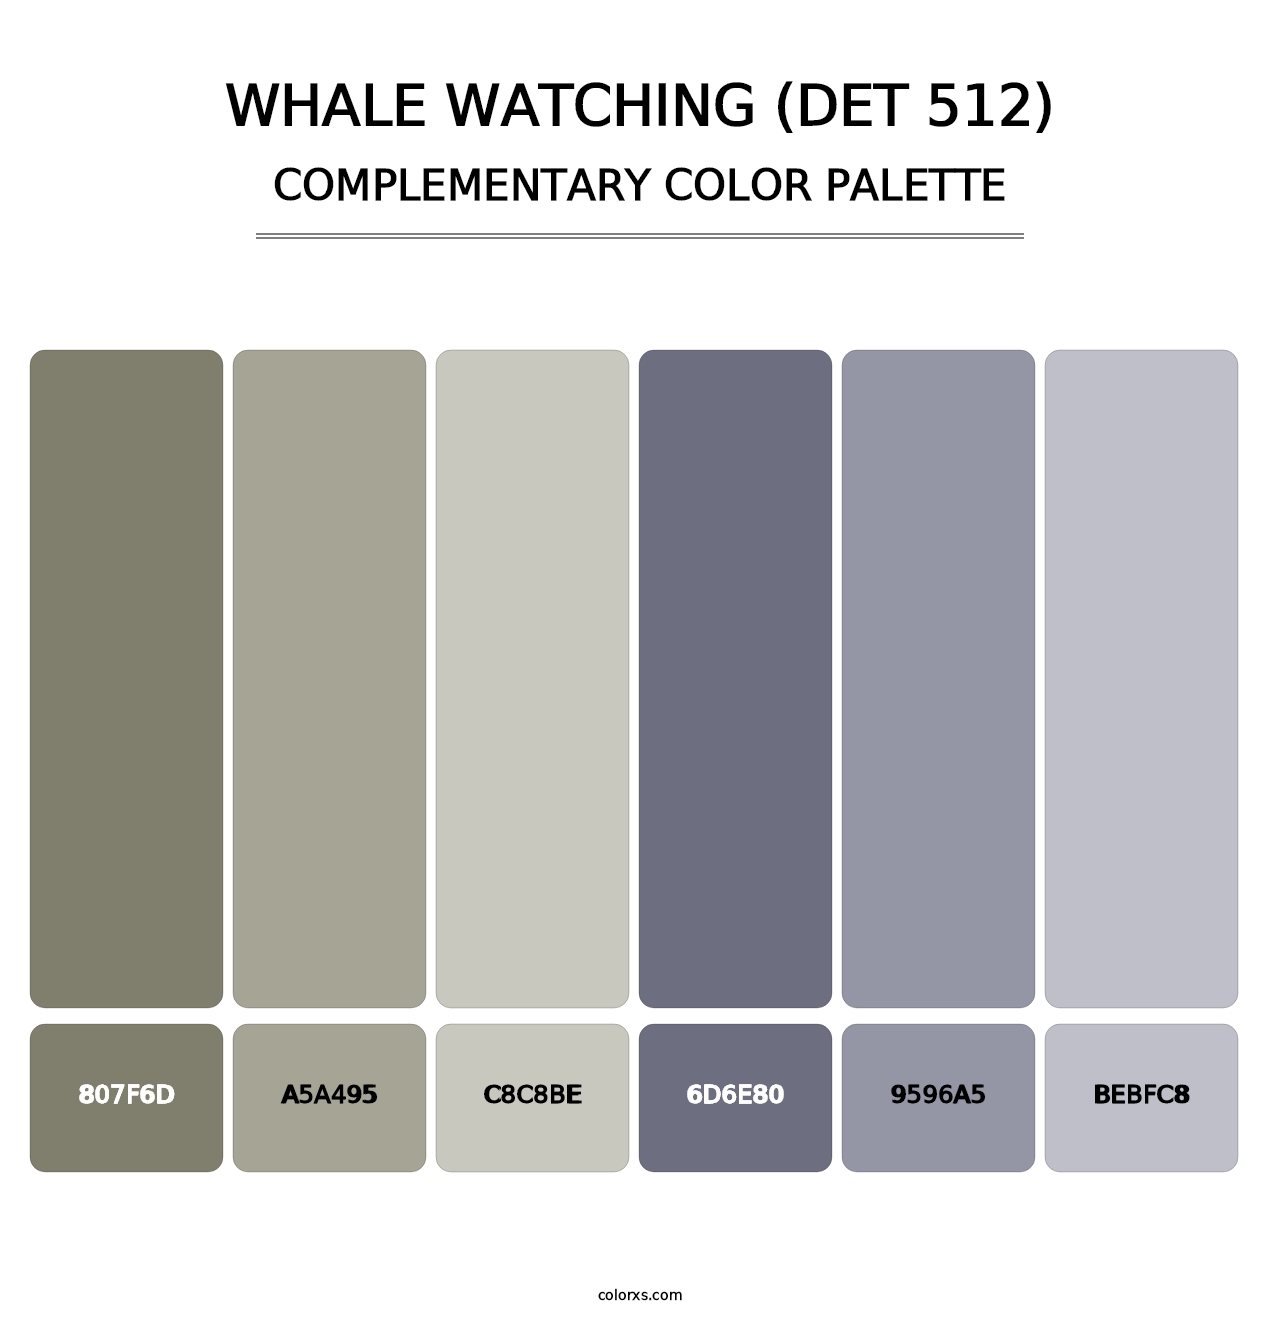 Whale Watching (DET 512) - Complementary Color Palette